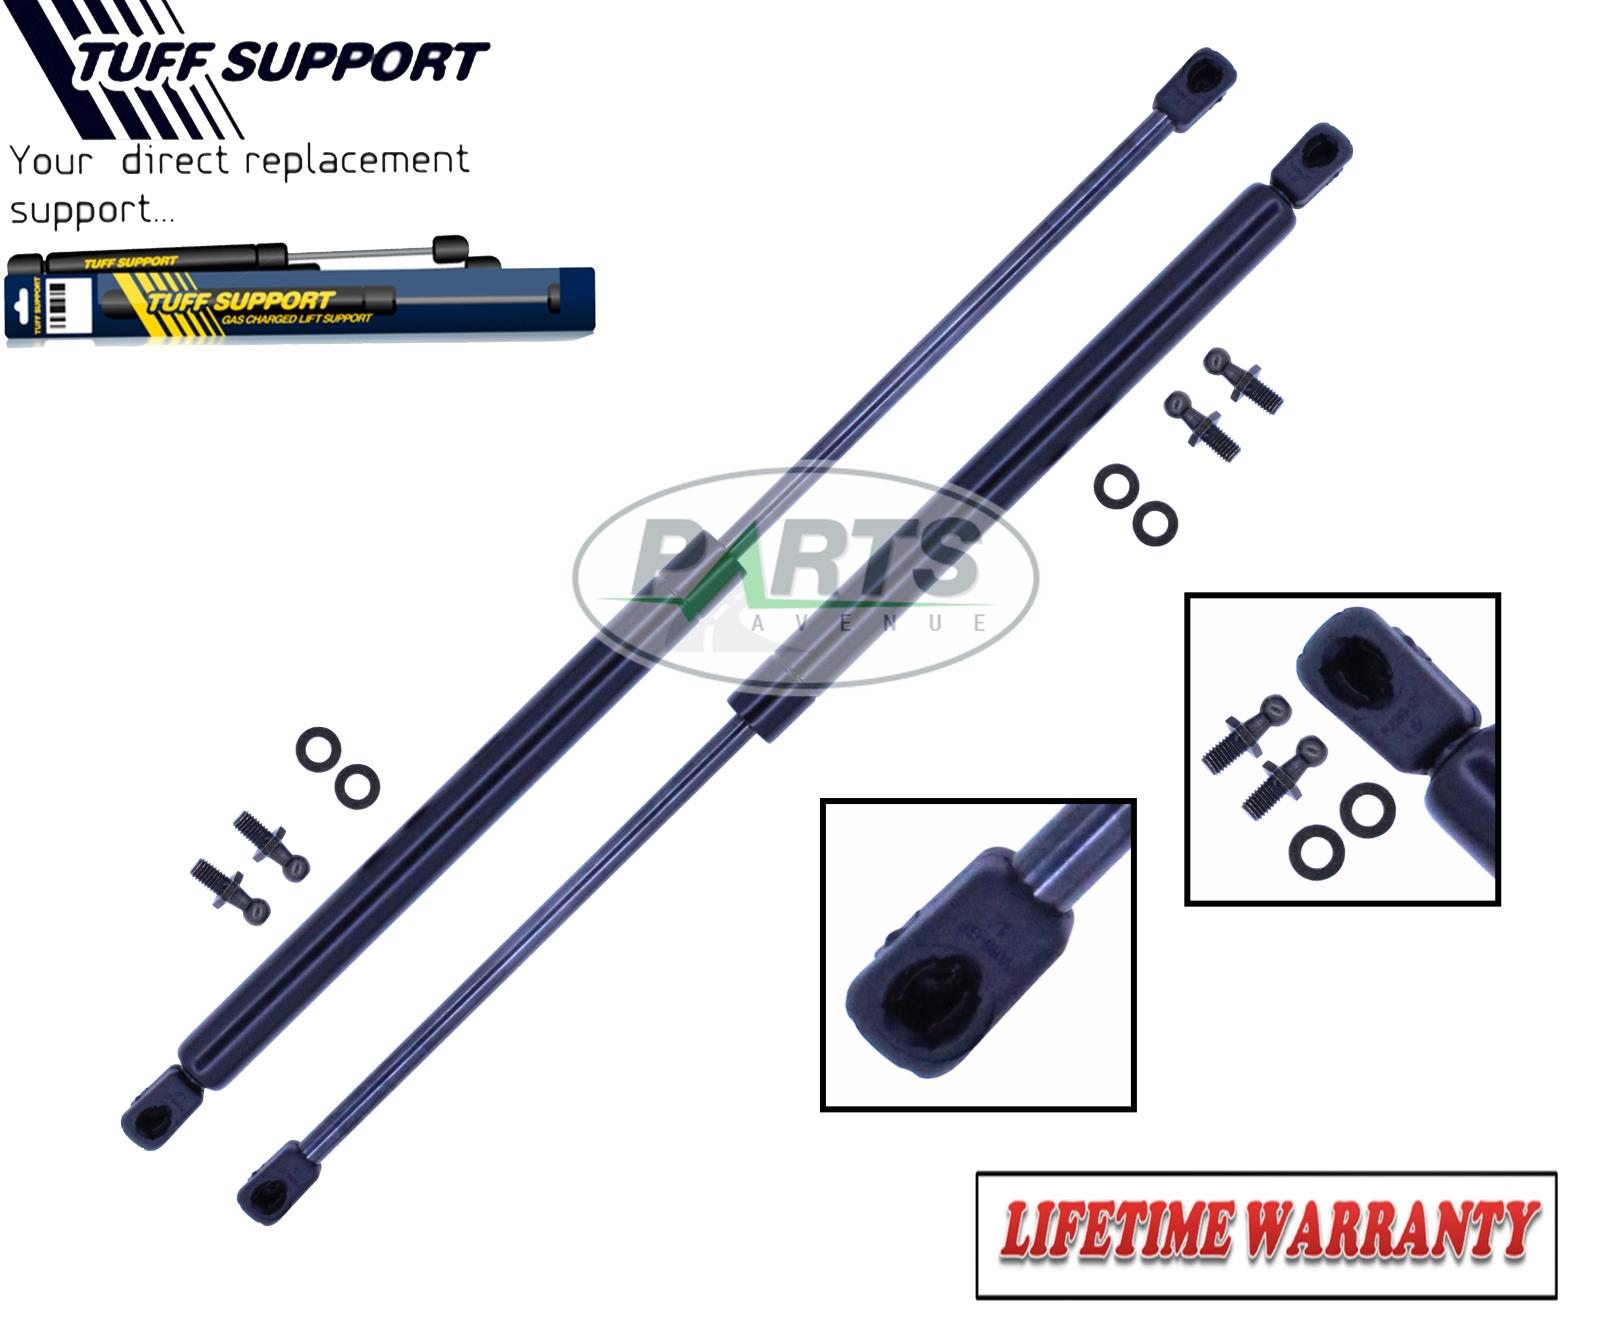 2PC FRONT HOOD LIFT SUPPORTS SHOCKS STRUTS ARMS PROPS RODS DAMPER